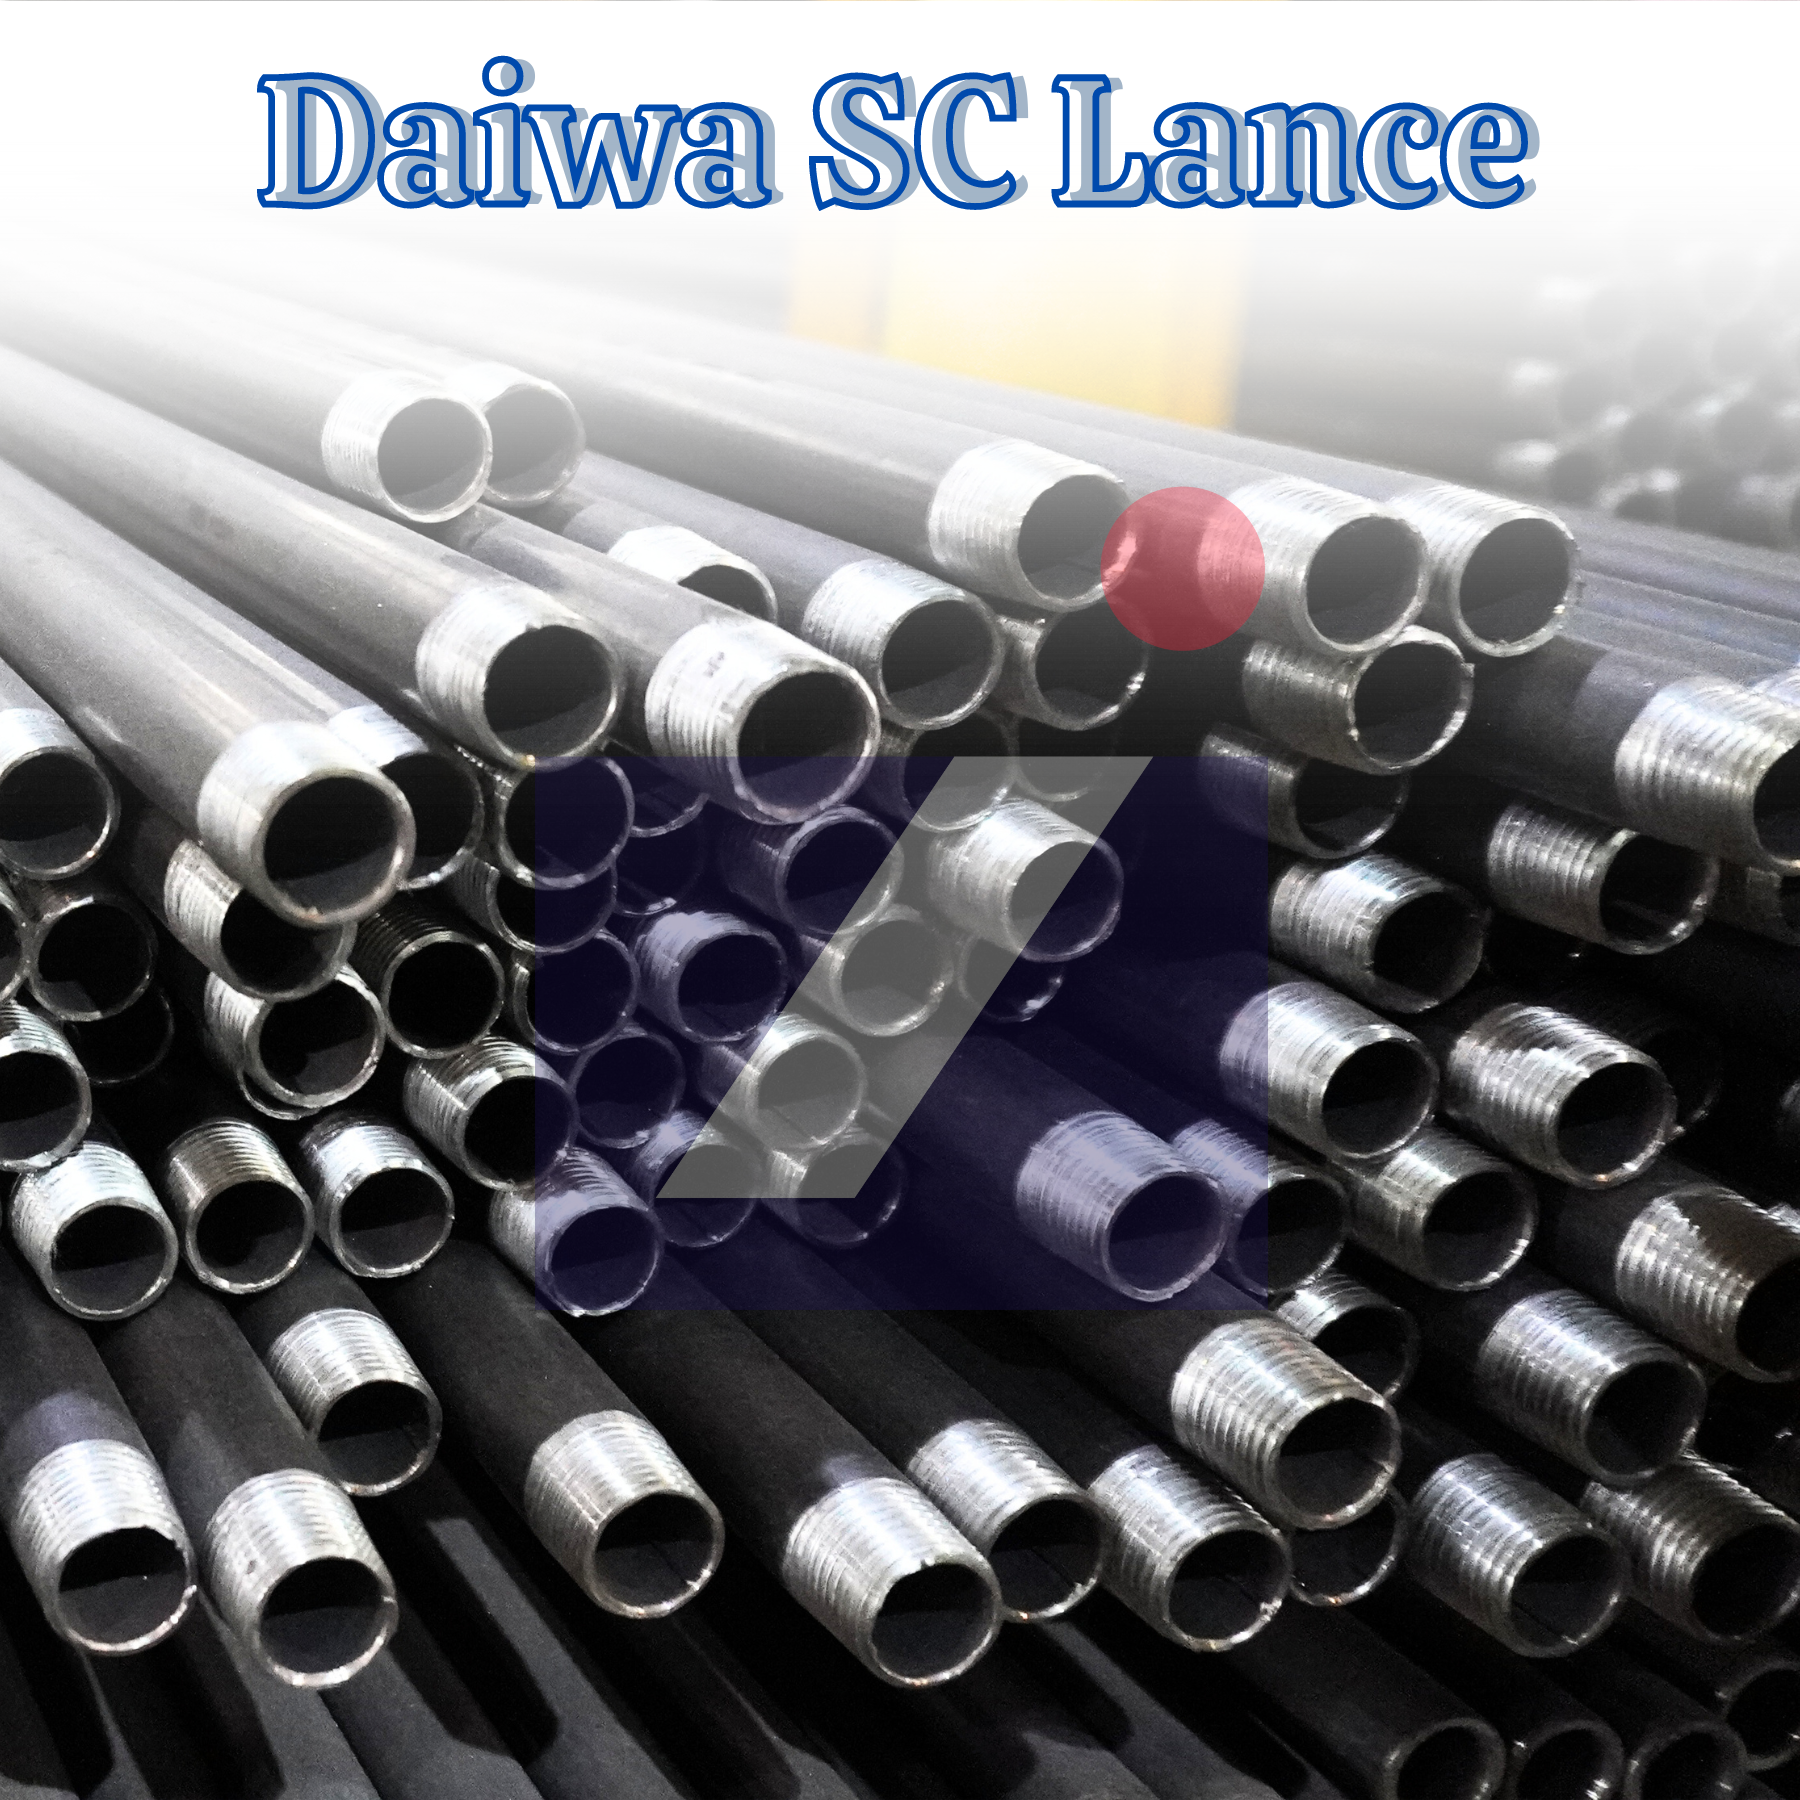 The Difference Between Daiwa SC Lance and Mild Steel Pipe